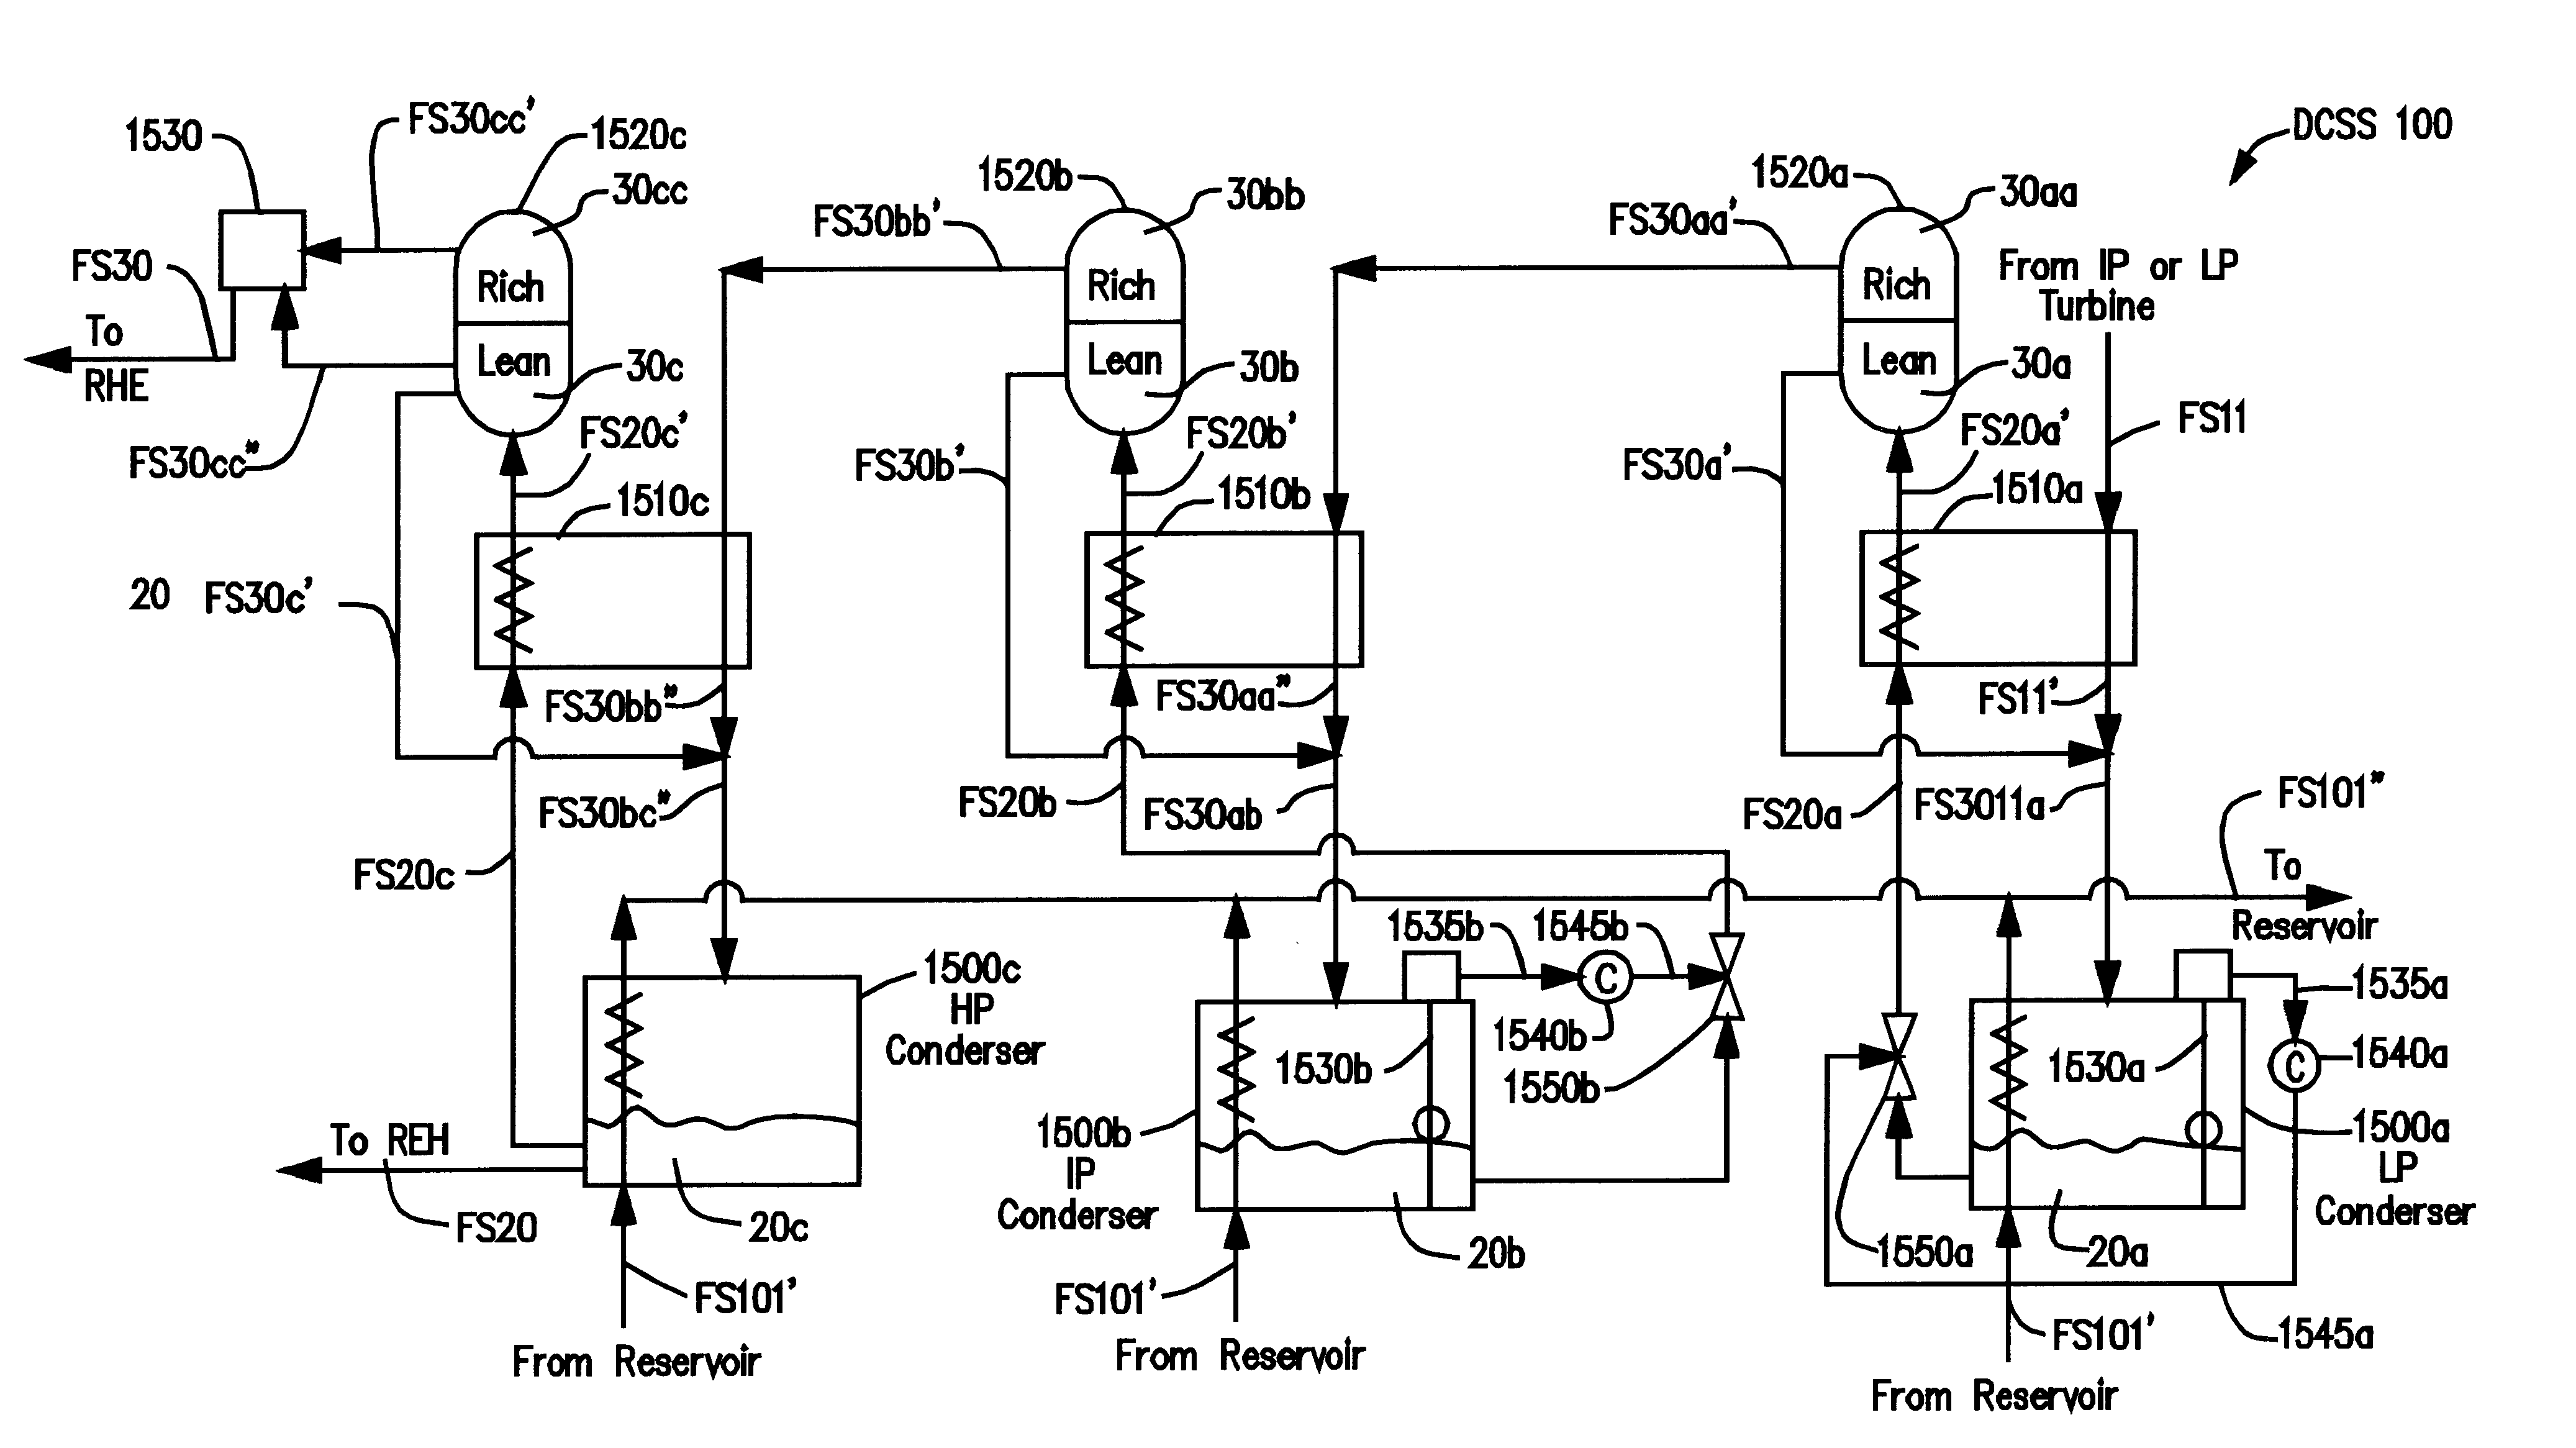 Technique for controlling DCSS condensate levels in a Kalina cycle power generation system